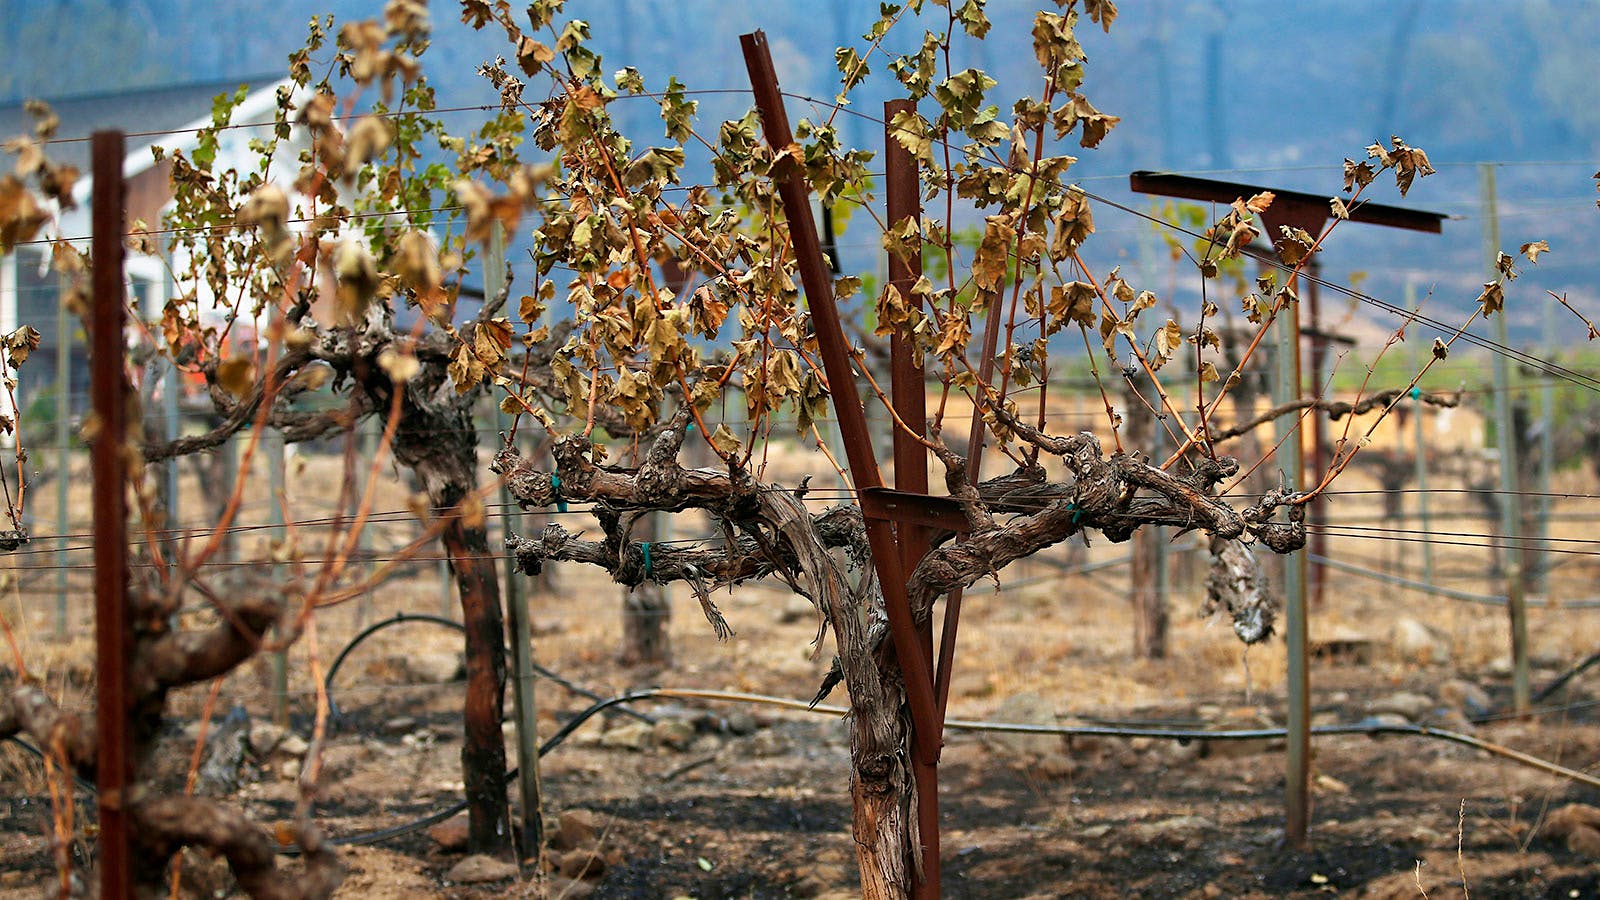 How Did 2020's Wildfires Impact California Wine?